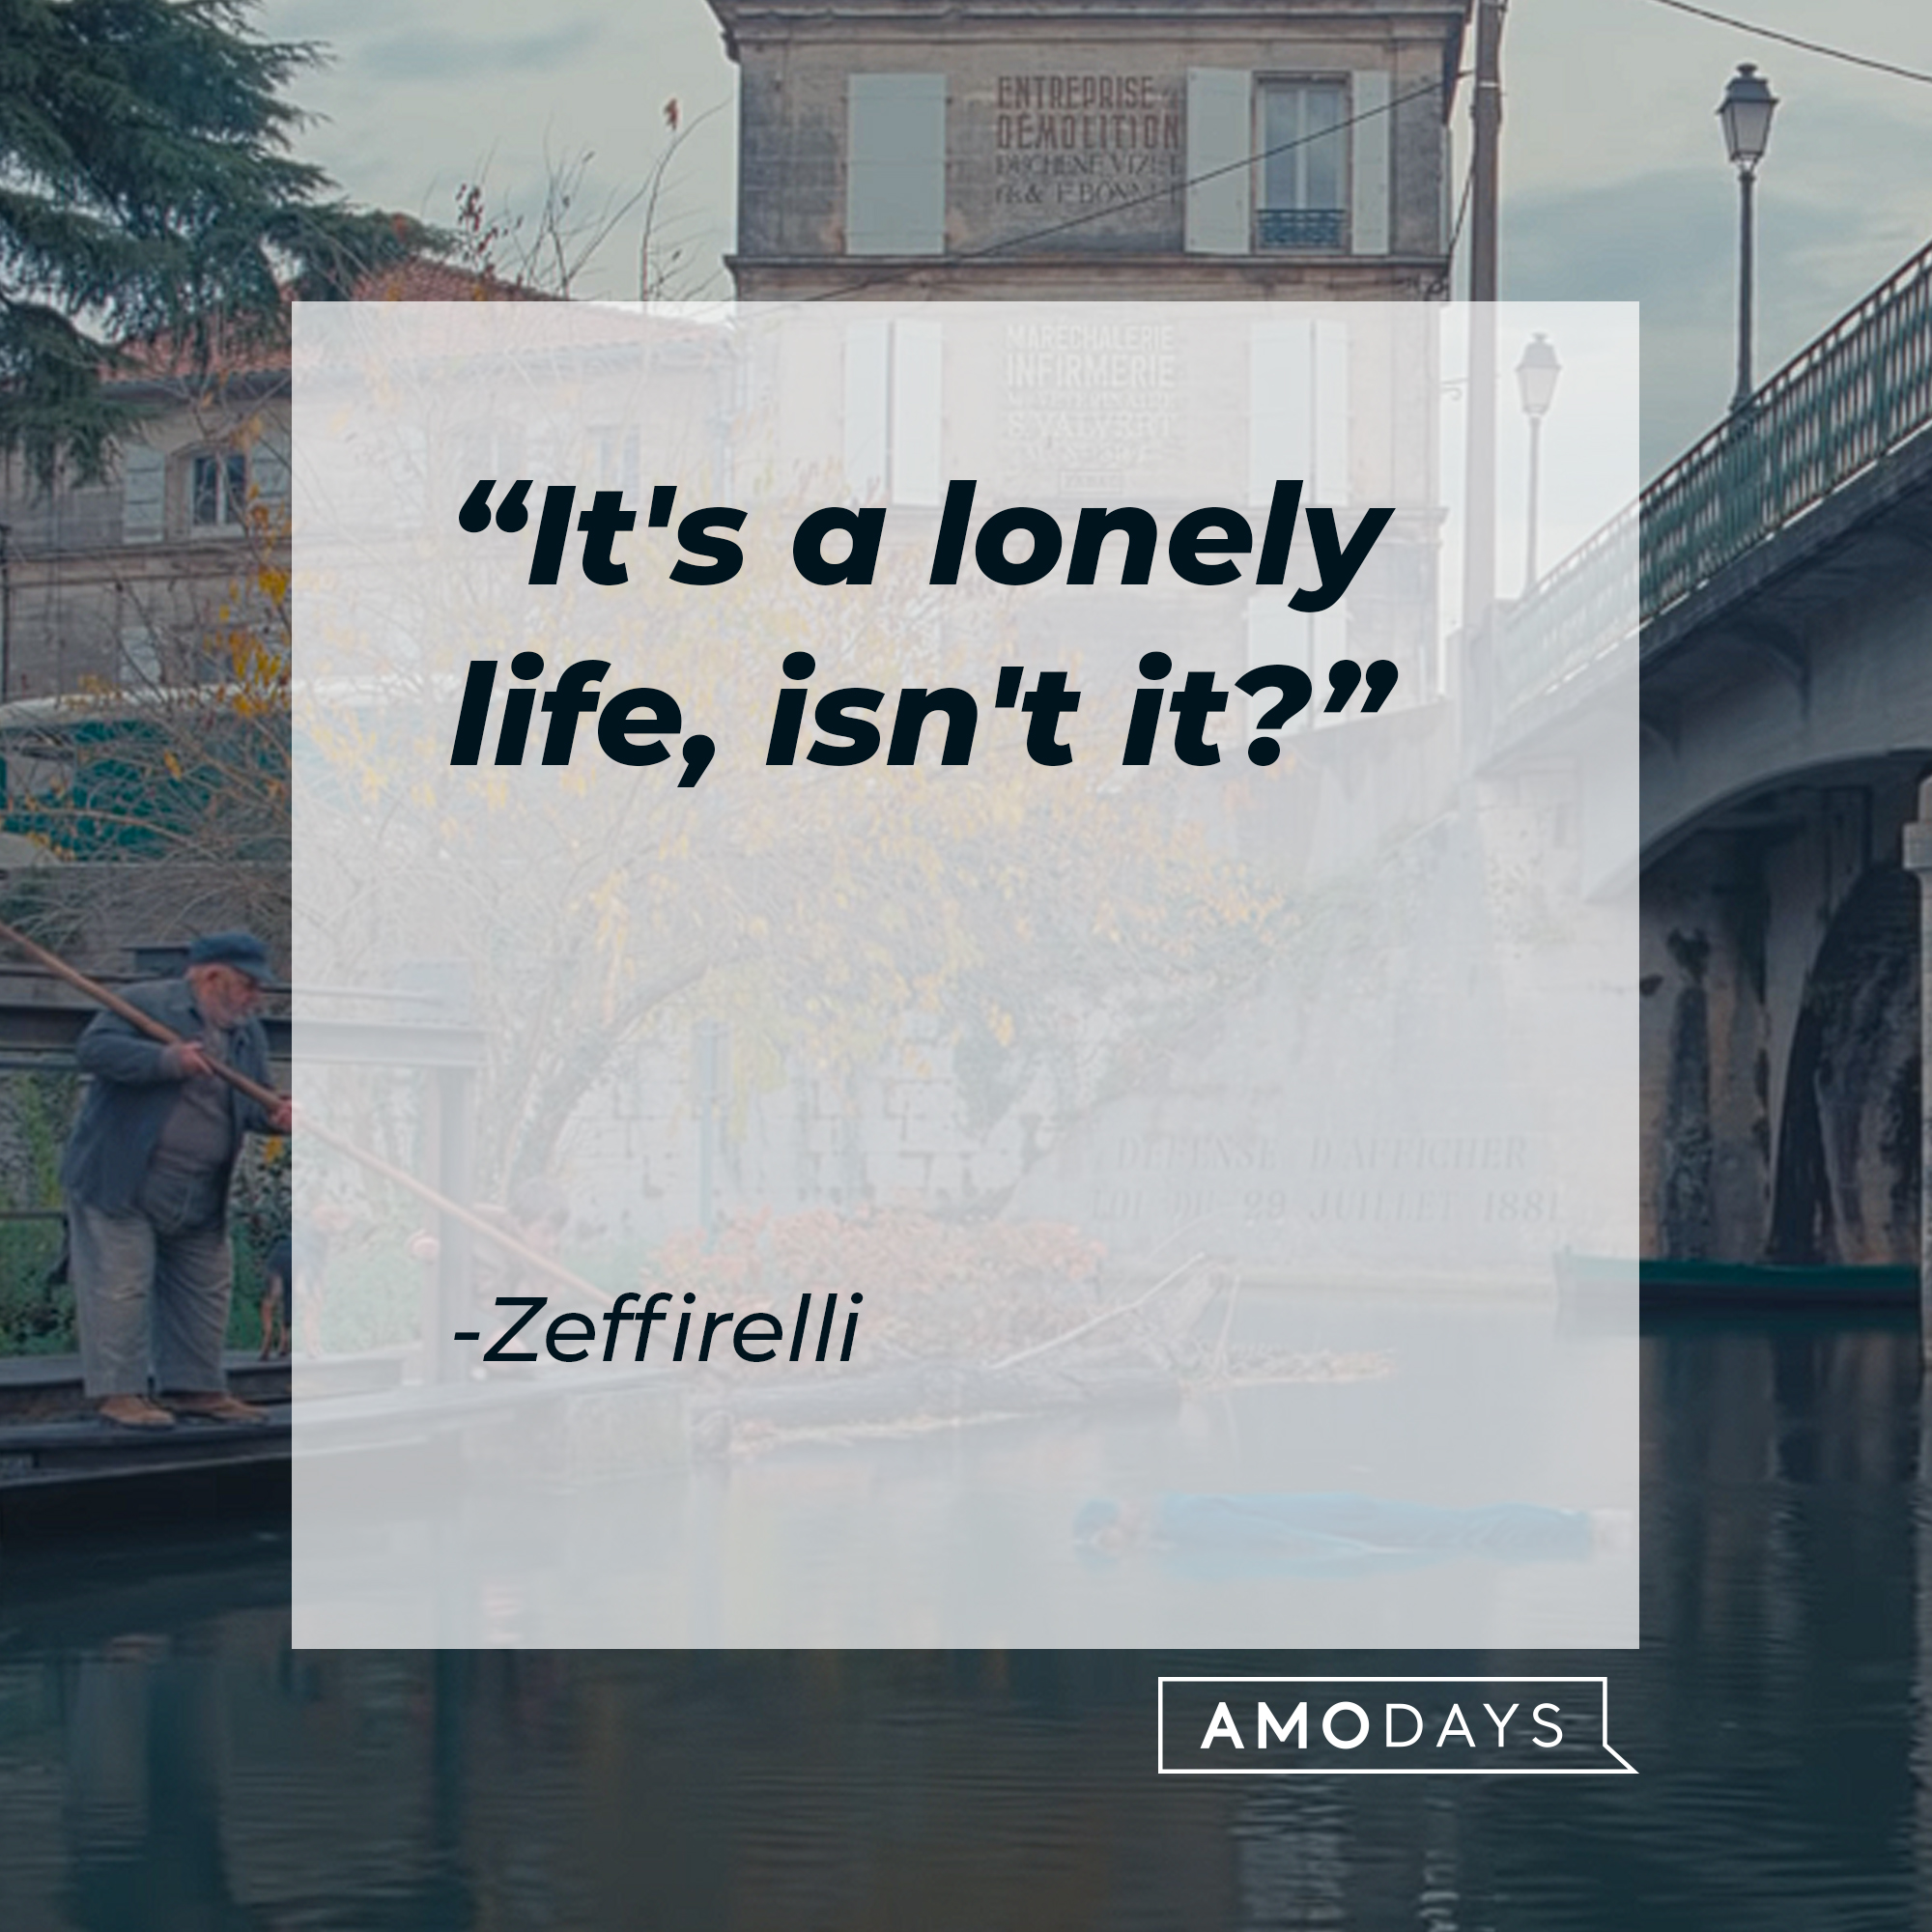 Zeffirelli's quote: "It's a lonely life, isn't it?" | Source: youtube.com/searchlightpictures